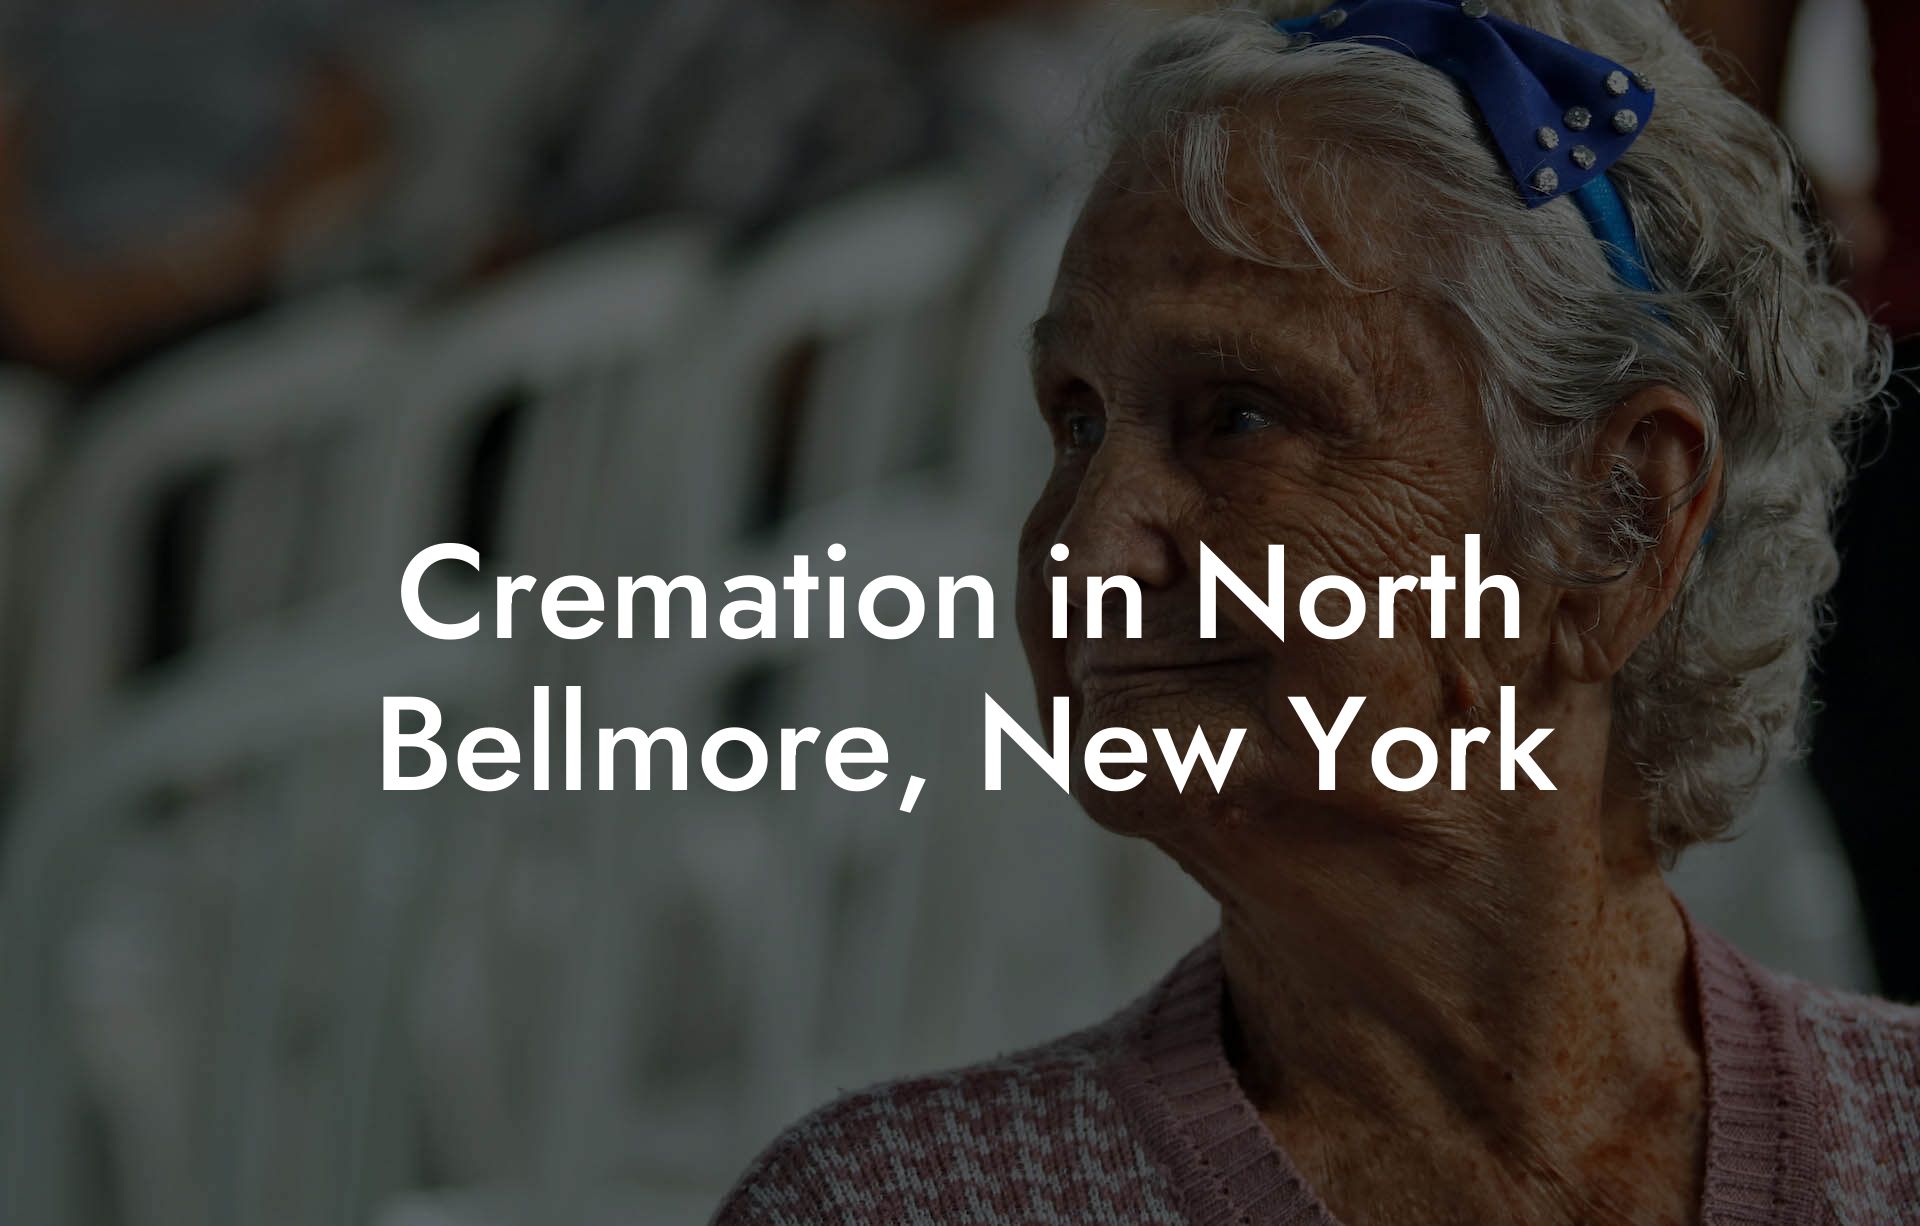 Cremation in North Bellmore, New York